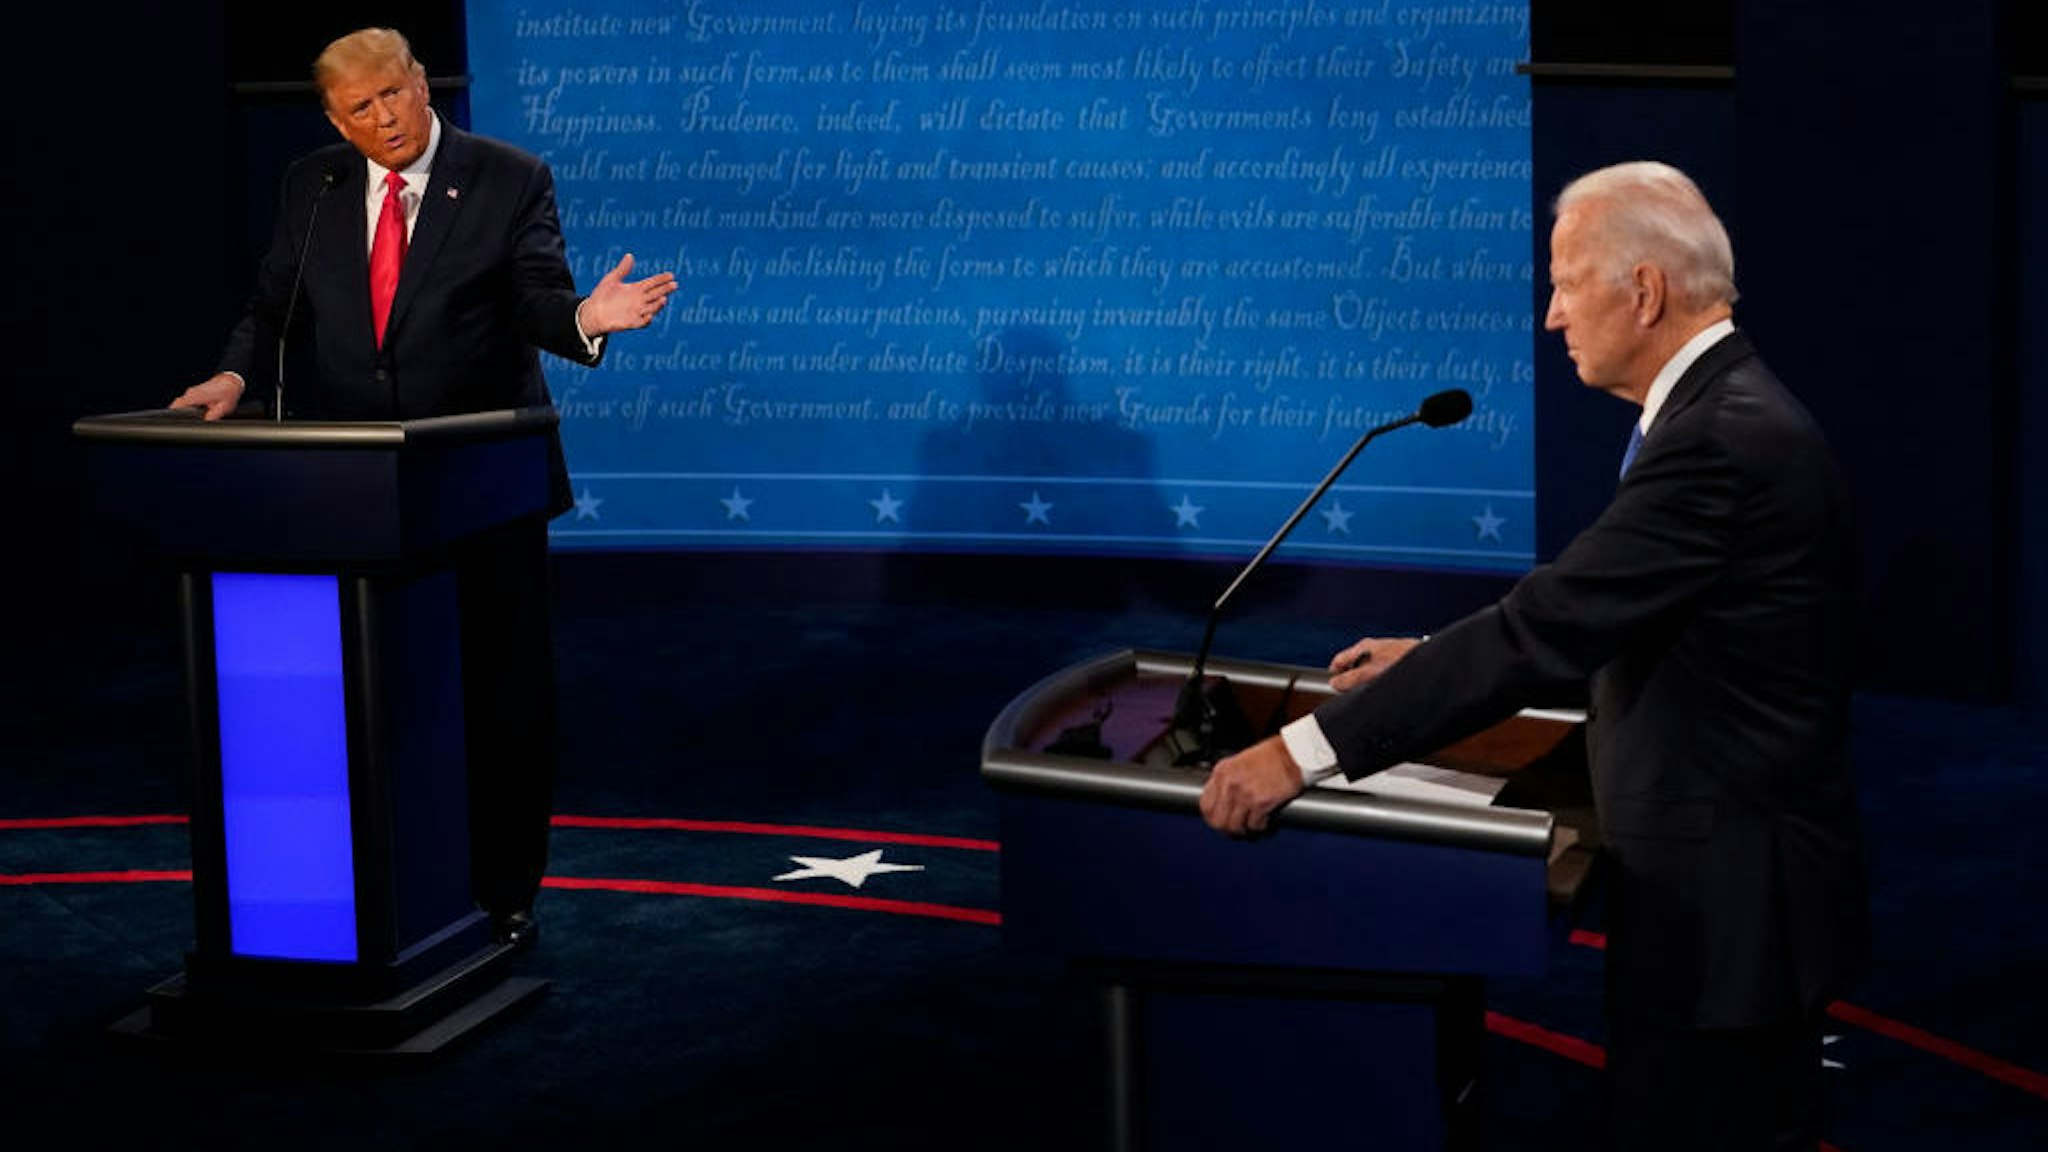 NASHVILLE, TENNESSEE - OCTOBER 22: President Donald Trump gestures toward Democratic presidential candidate former Vice President Joe Biden during the second and final presidential debate at Belmont University on October 22, 2020 in Nashville, Tennessee. This is the last debate between the two candidates before the election on November 3. (Photo by Morry Gash-Pool/Getty Images)